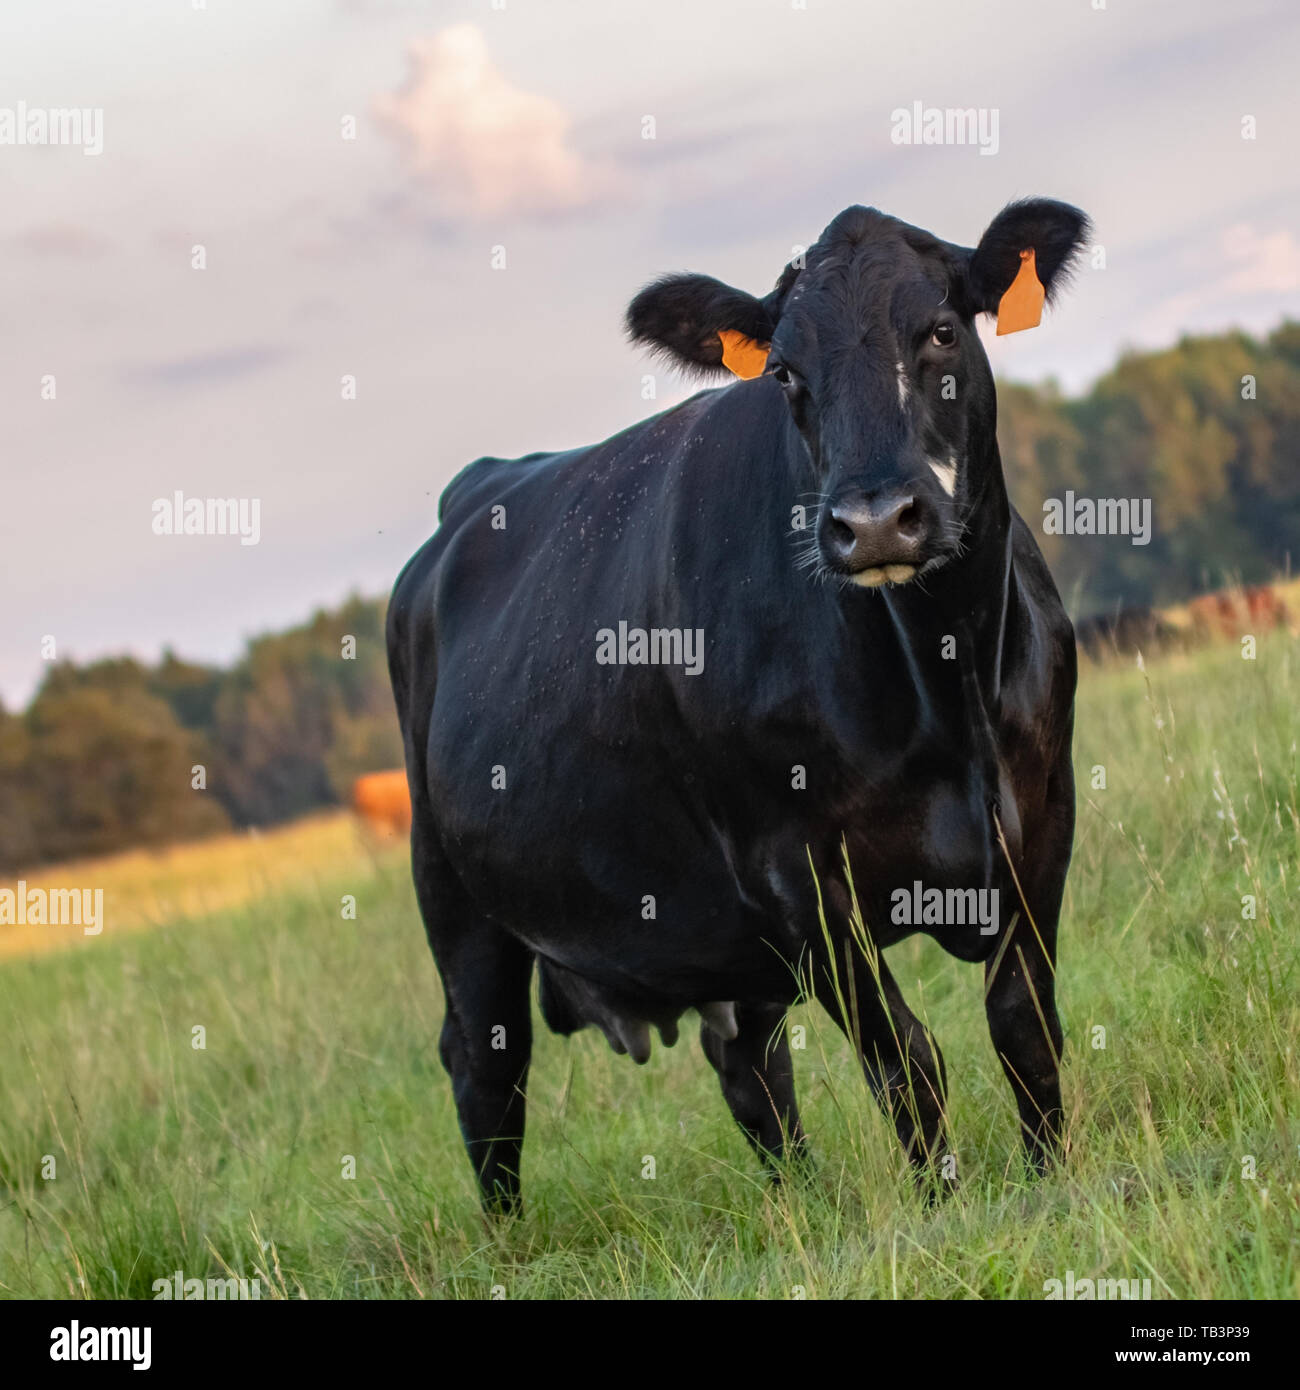 Single Angus crossbred brood cow in the foreground with the rest of the herd out of focus in the background. Square format with dutch tilt. Stock Photo